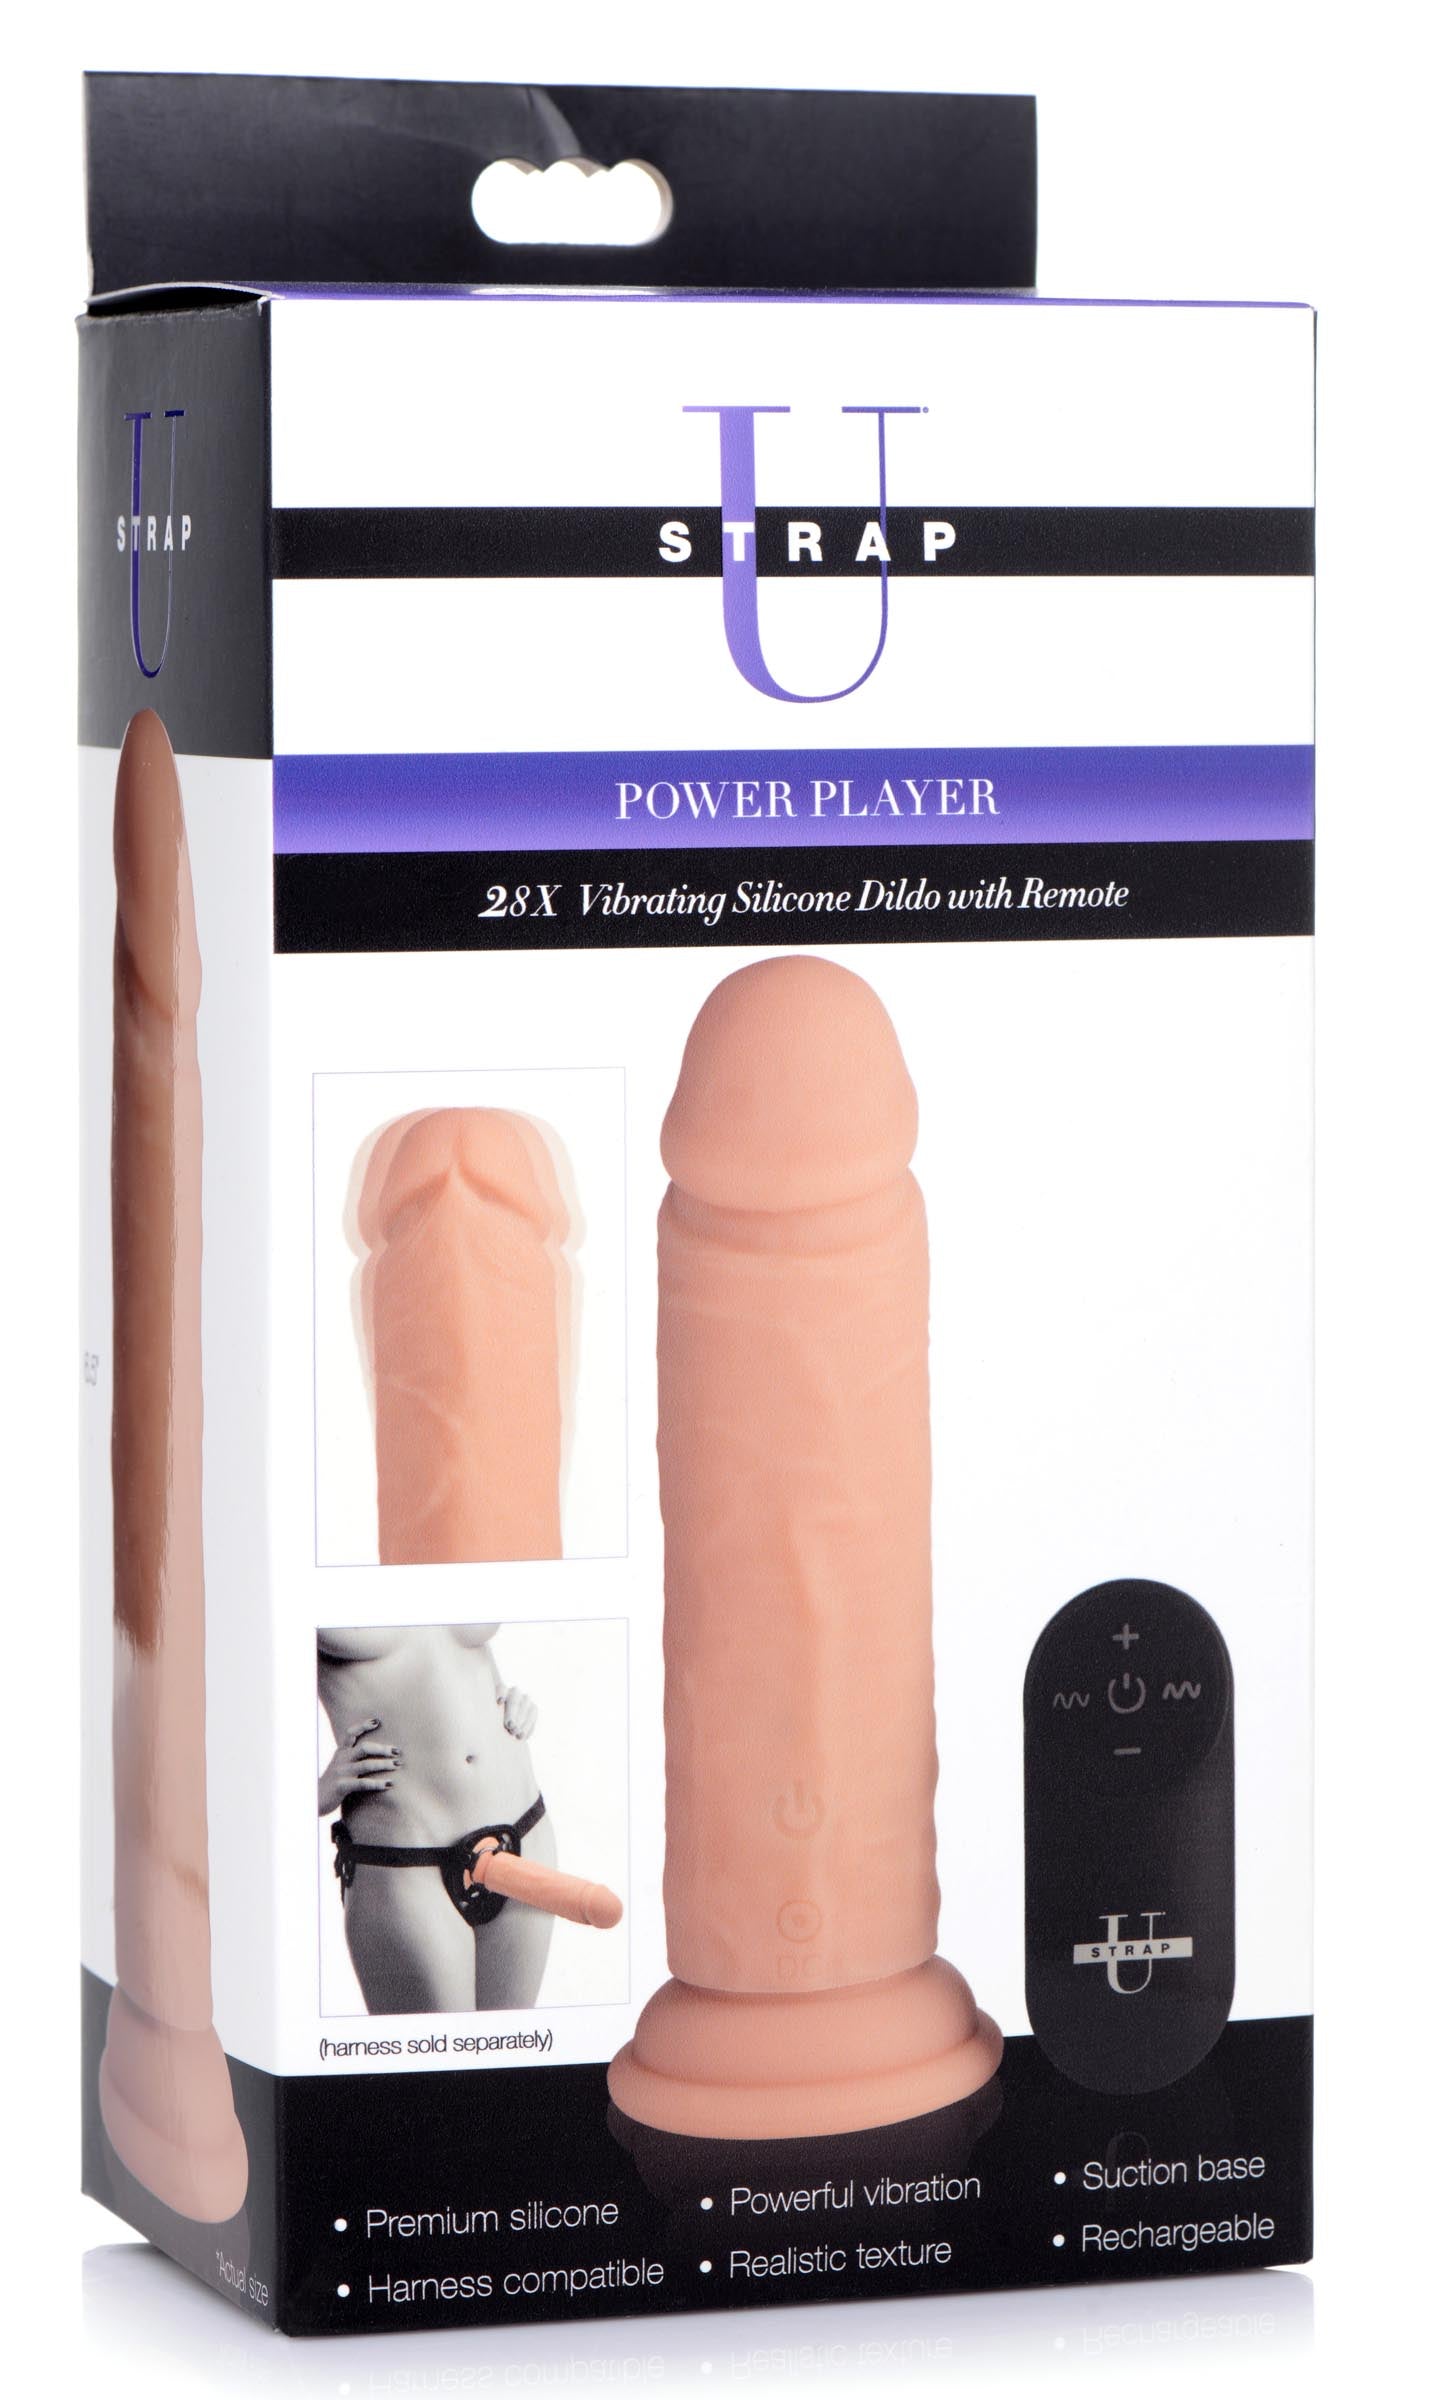 Power Player 28X Vibrating Silicone Dildo with Remote - Light